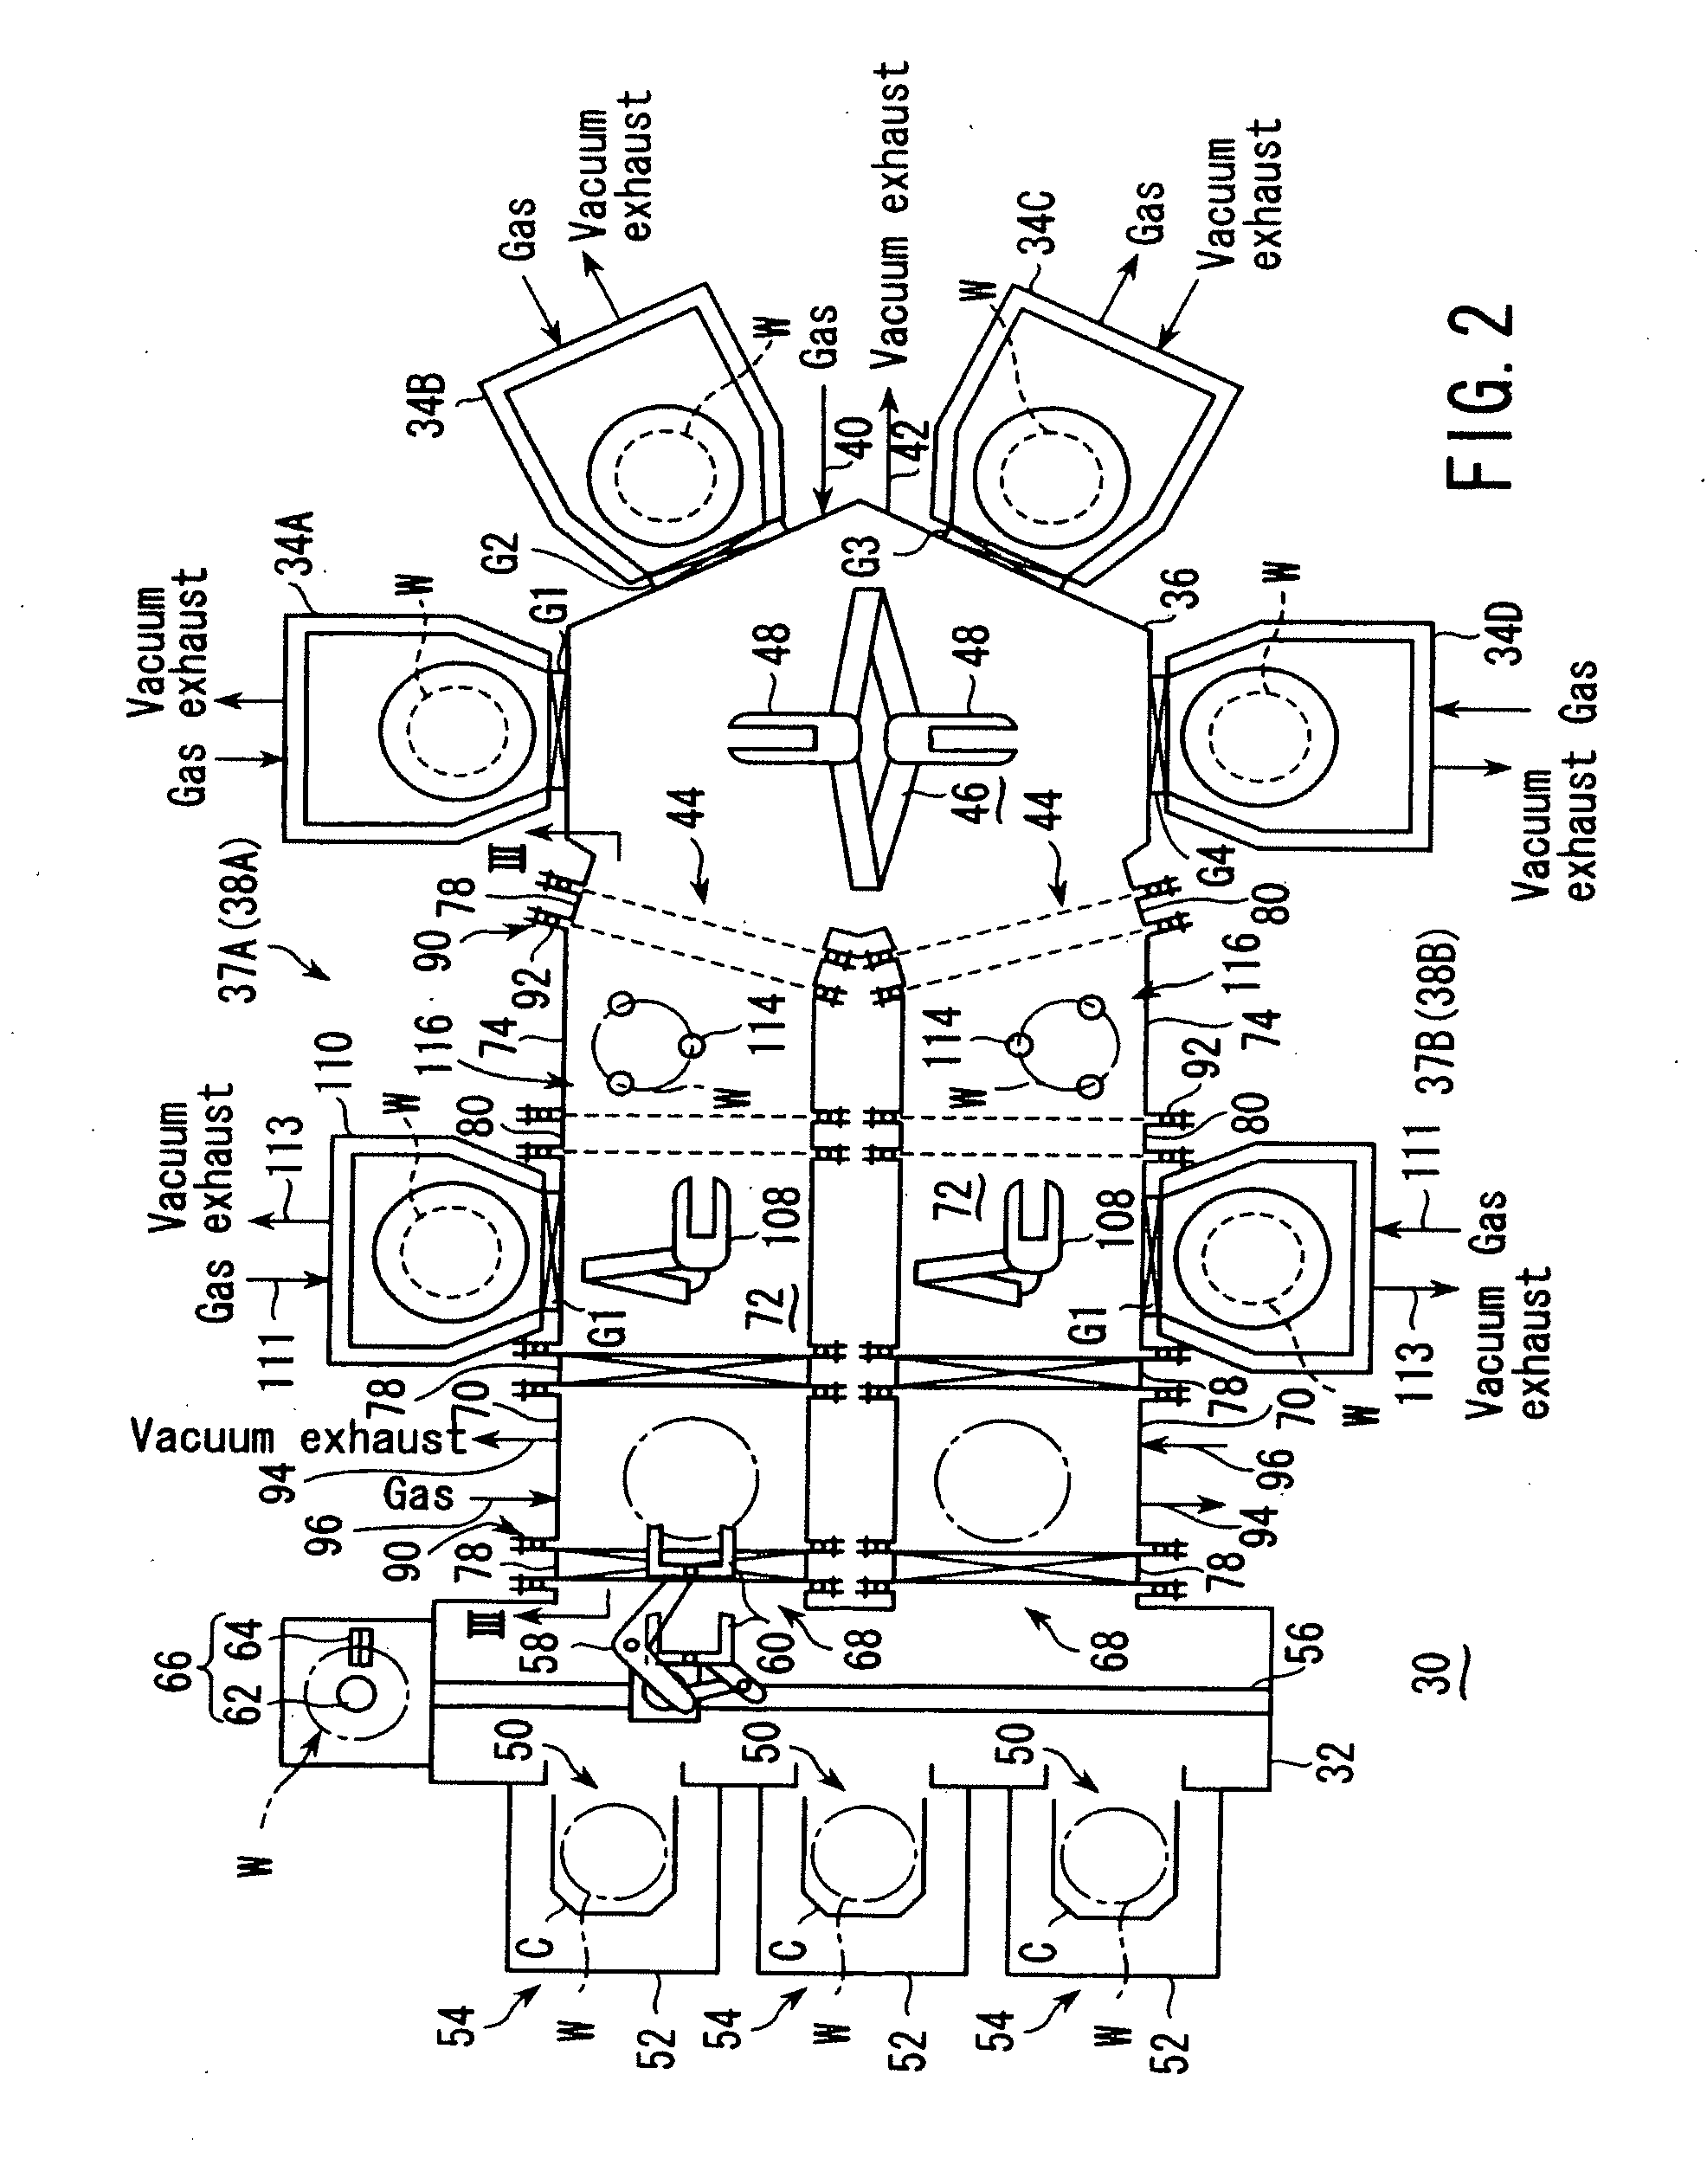 Semiconductor processing system